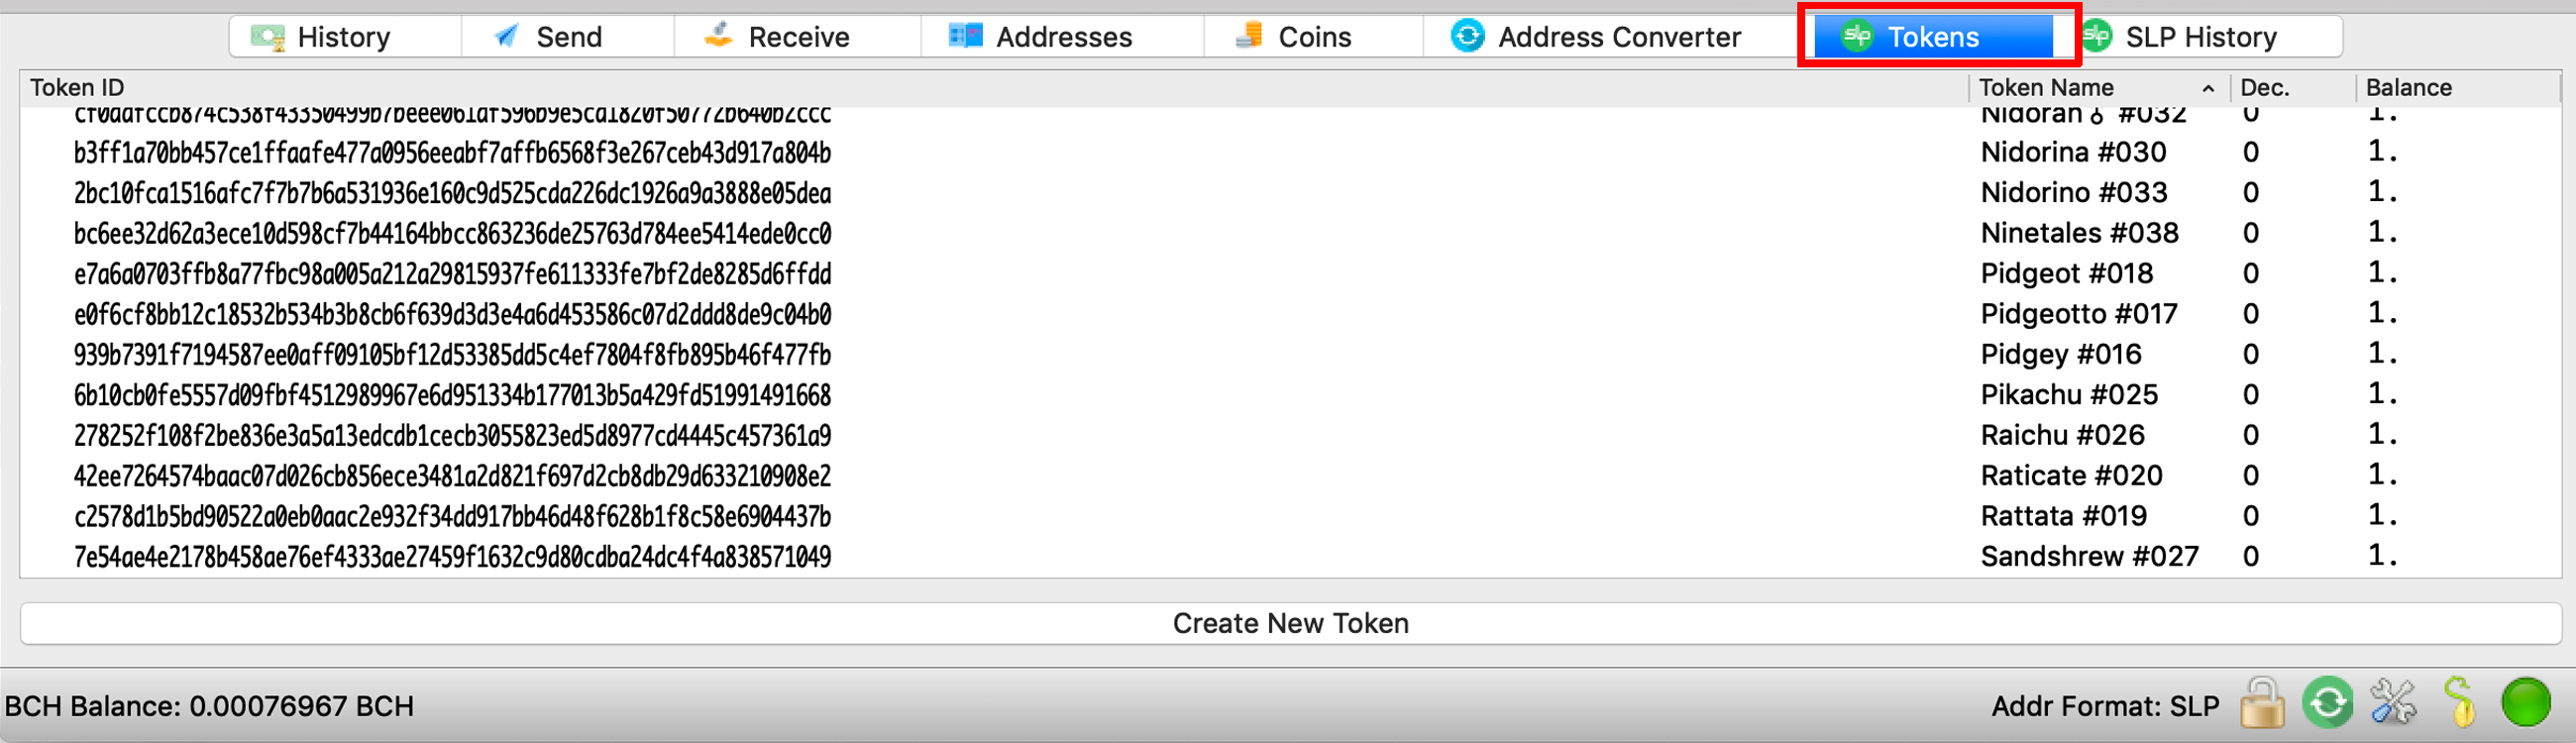 How To Create and Airdrop Your Own Token To Your Friends 